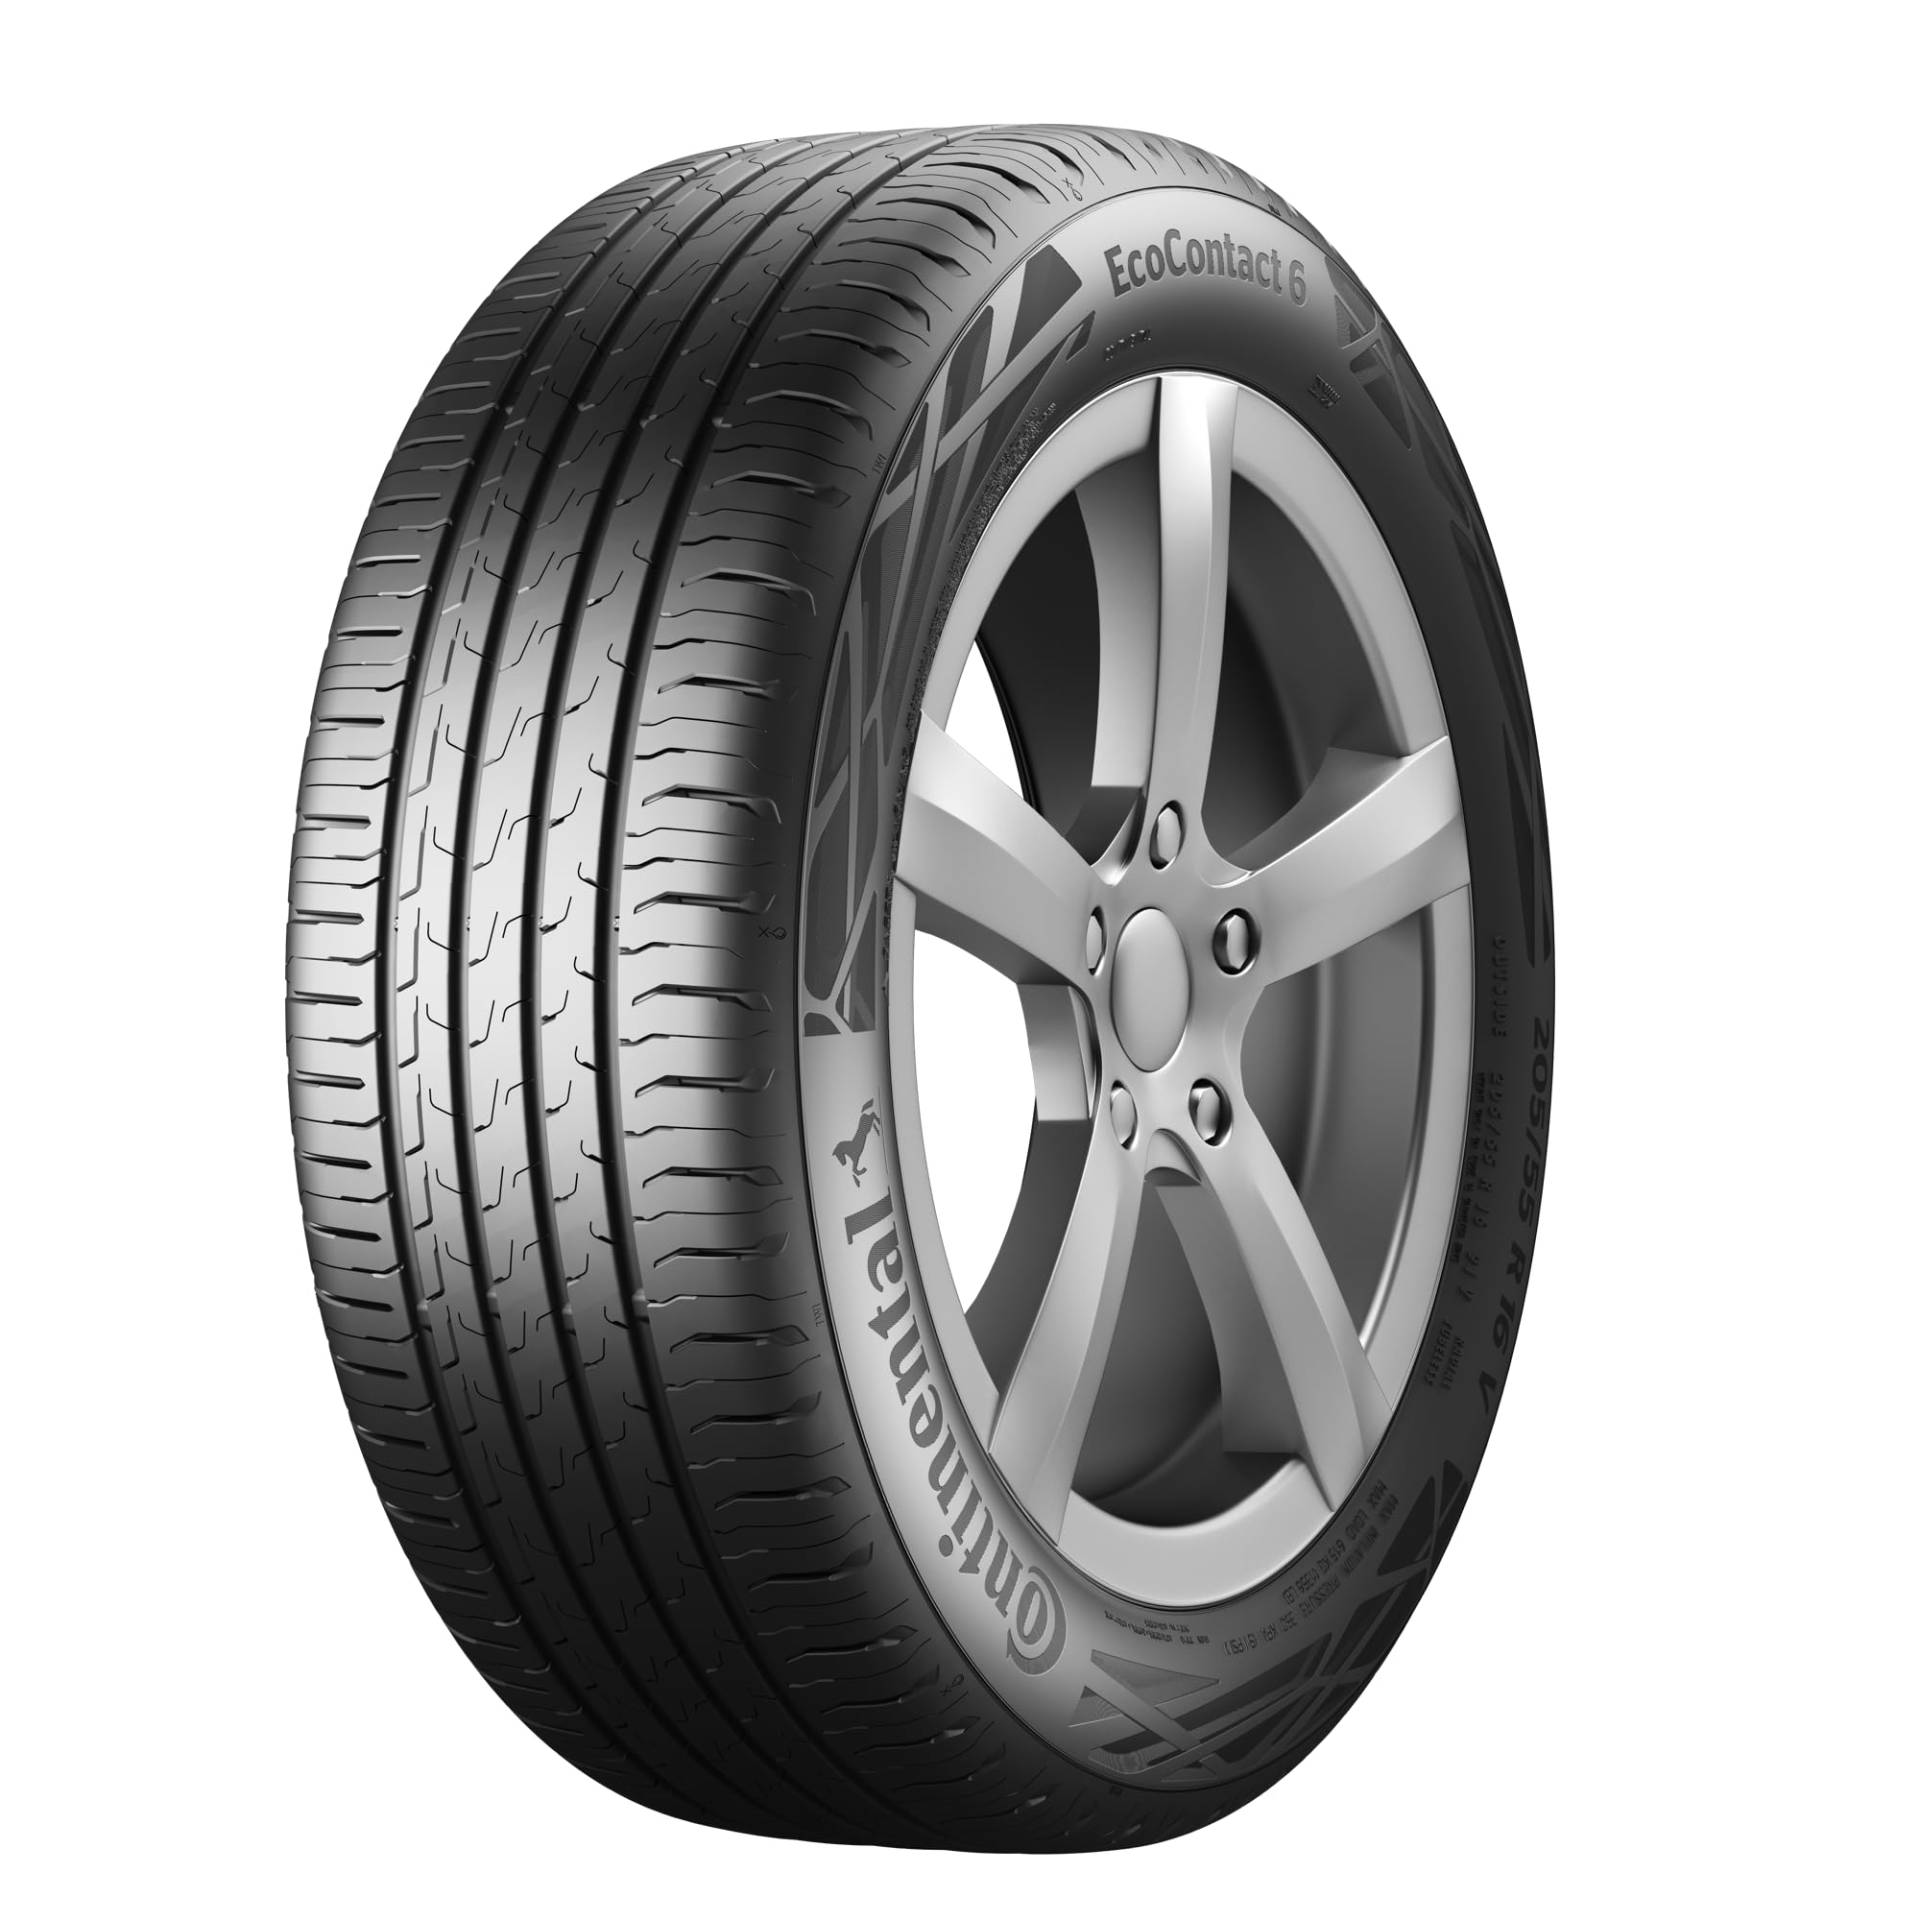 CONTINENTAL - EcoContact 6 - 215/55 R 17 - 094V/A/A/71dB - Sommerreifen von Continental